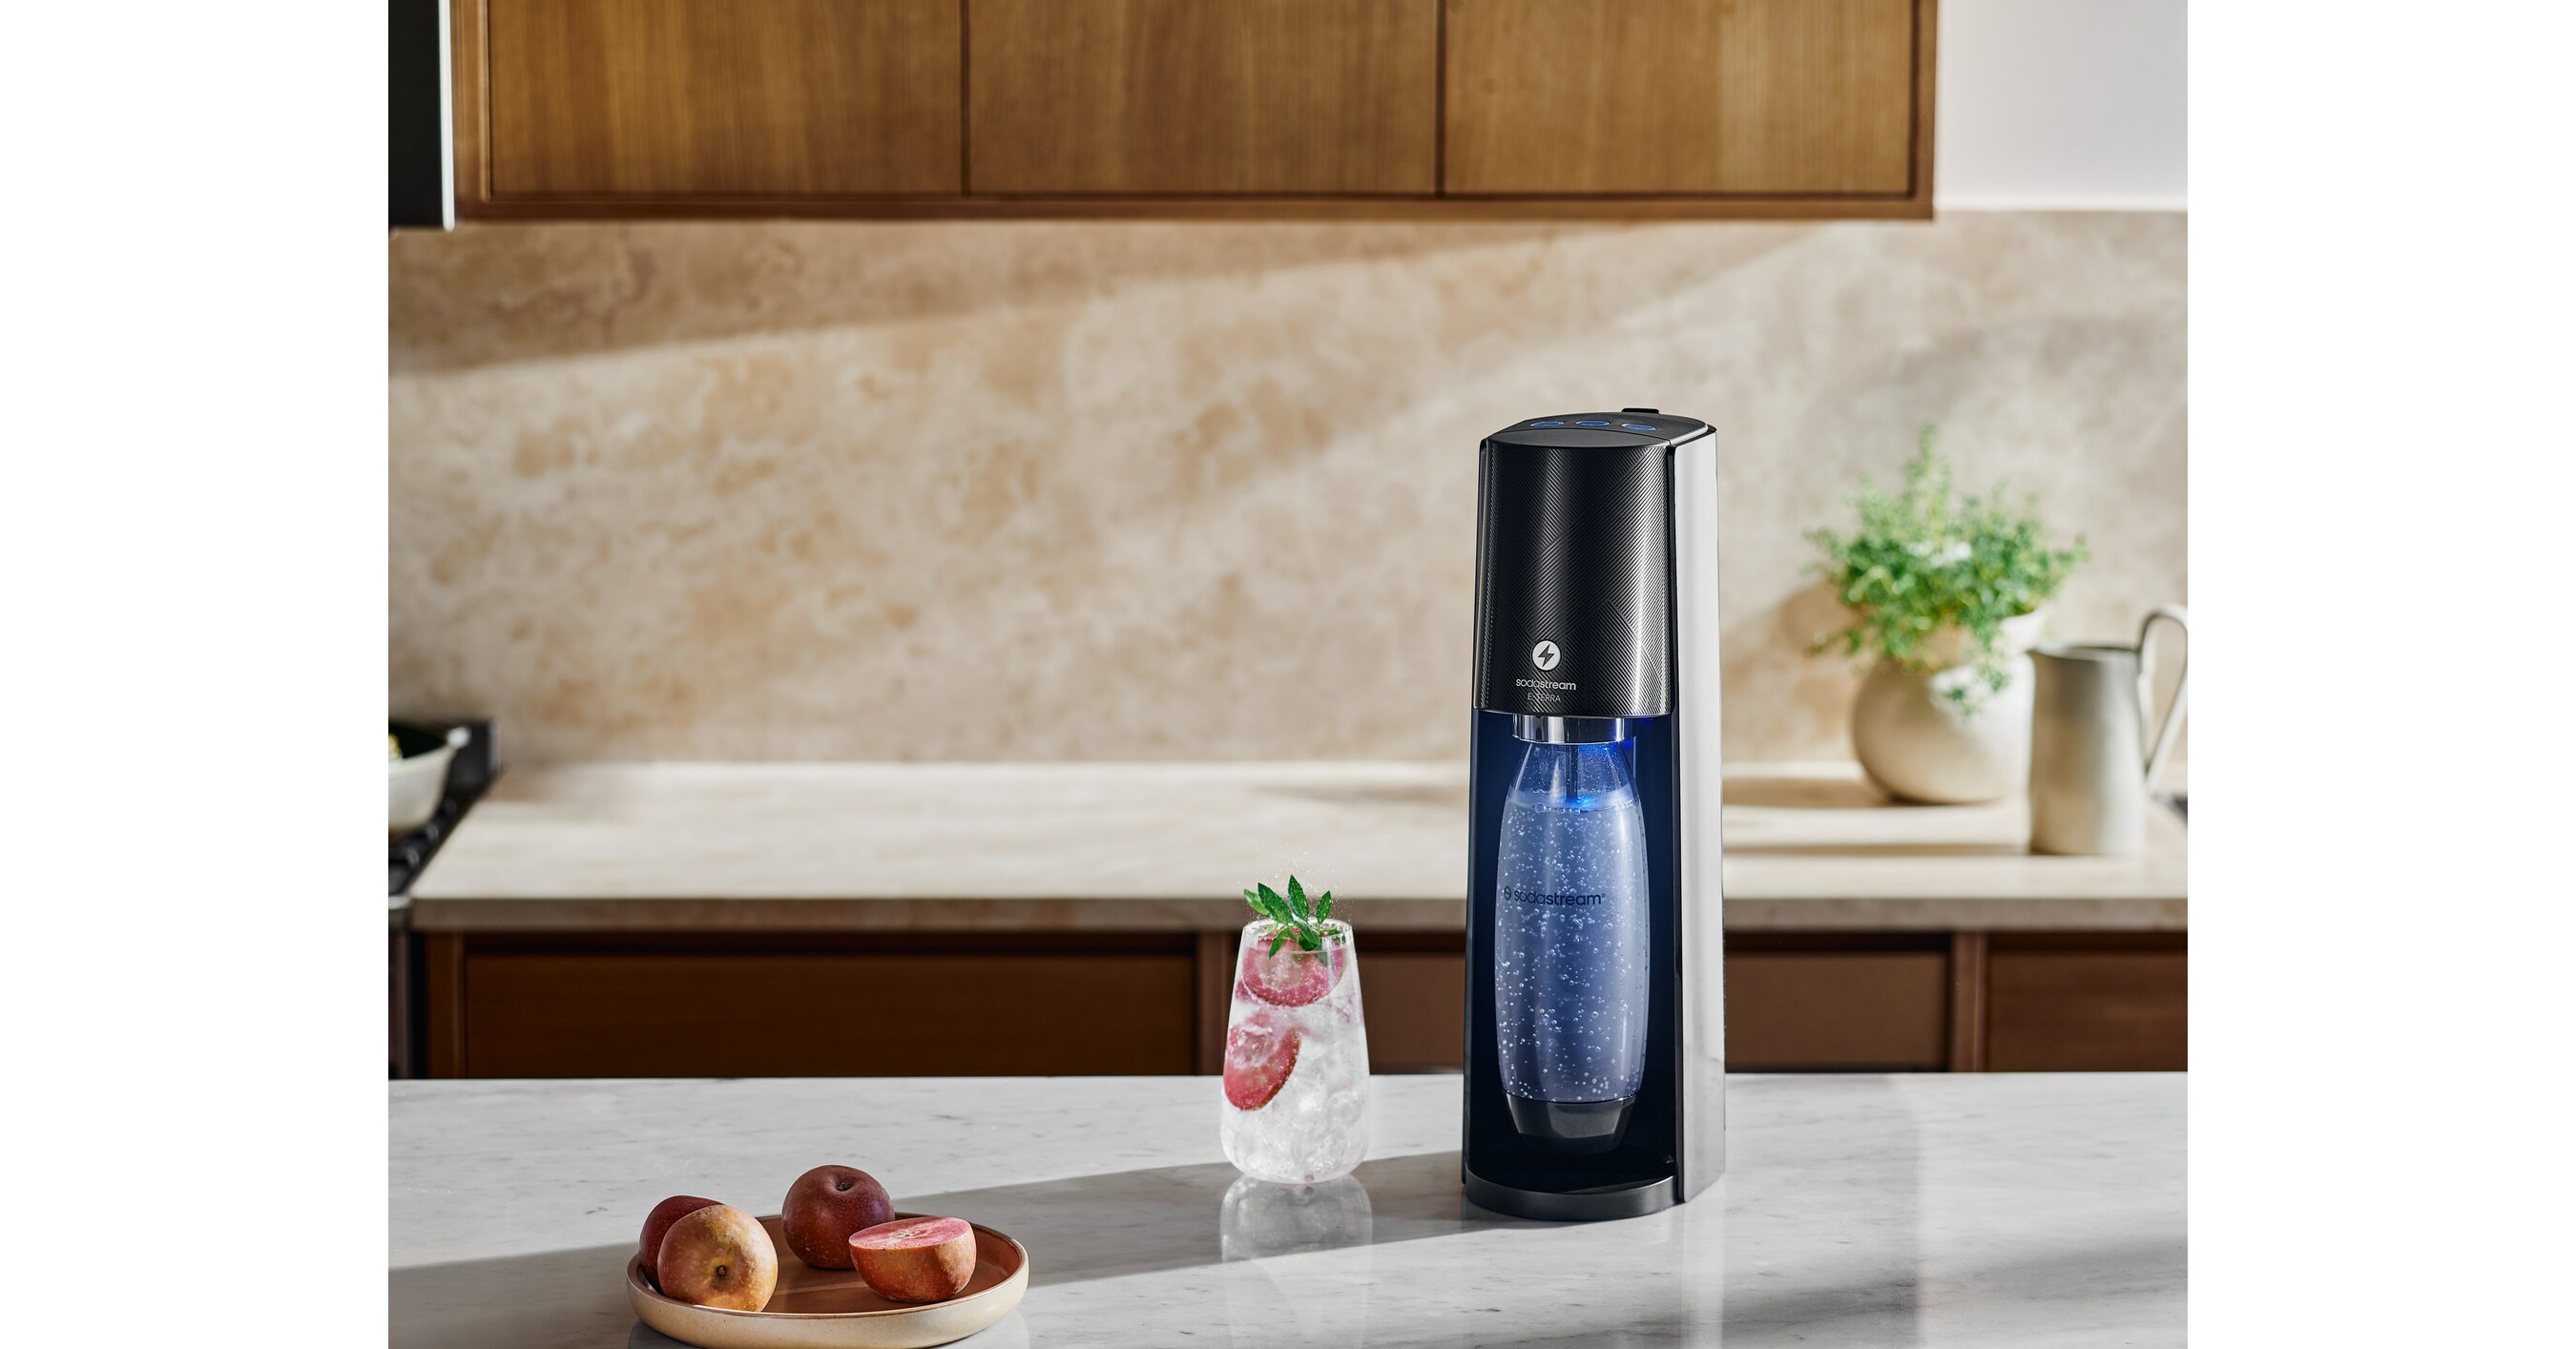 SodaStream Unveils Unbeatable Deals for  Prime Day with Up to 40% Off  Sparkling Water Makers